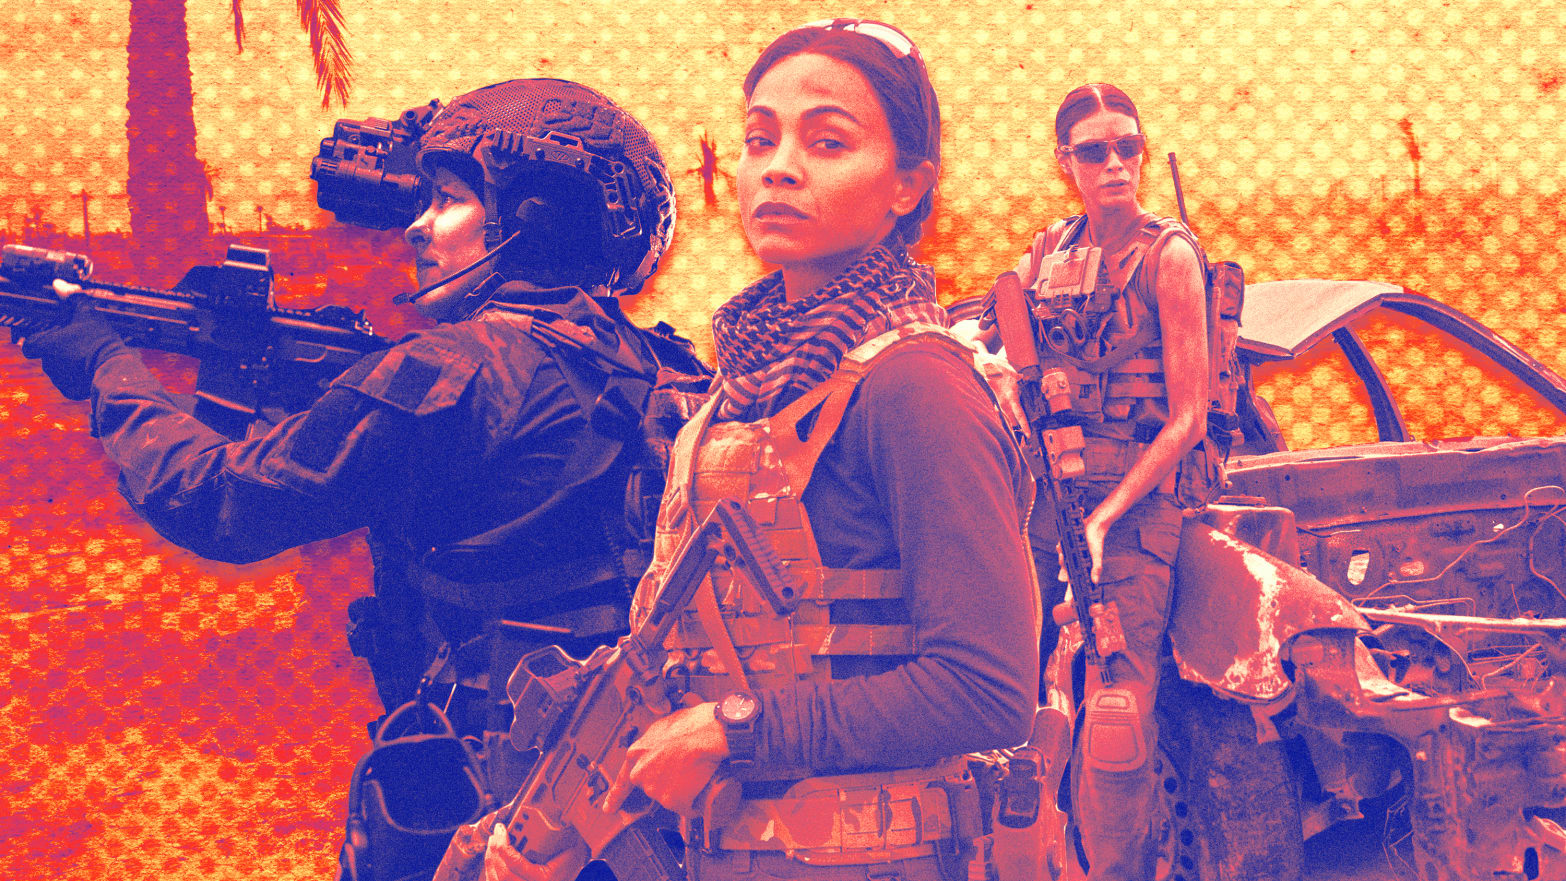 A photo illustration of Jill Wagner, Zoe Saldana, and Laysla De Oliveria in Special Ops: Lioness.